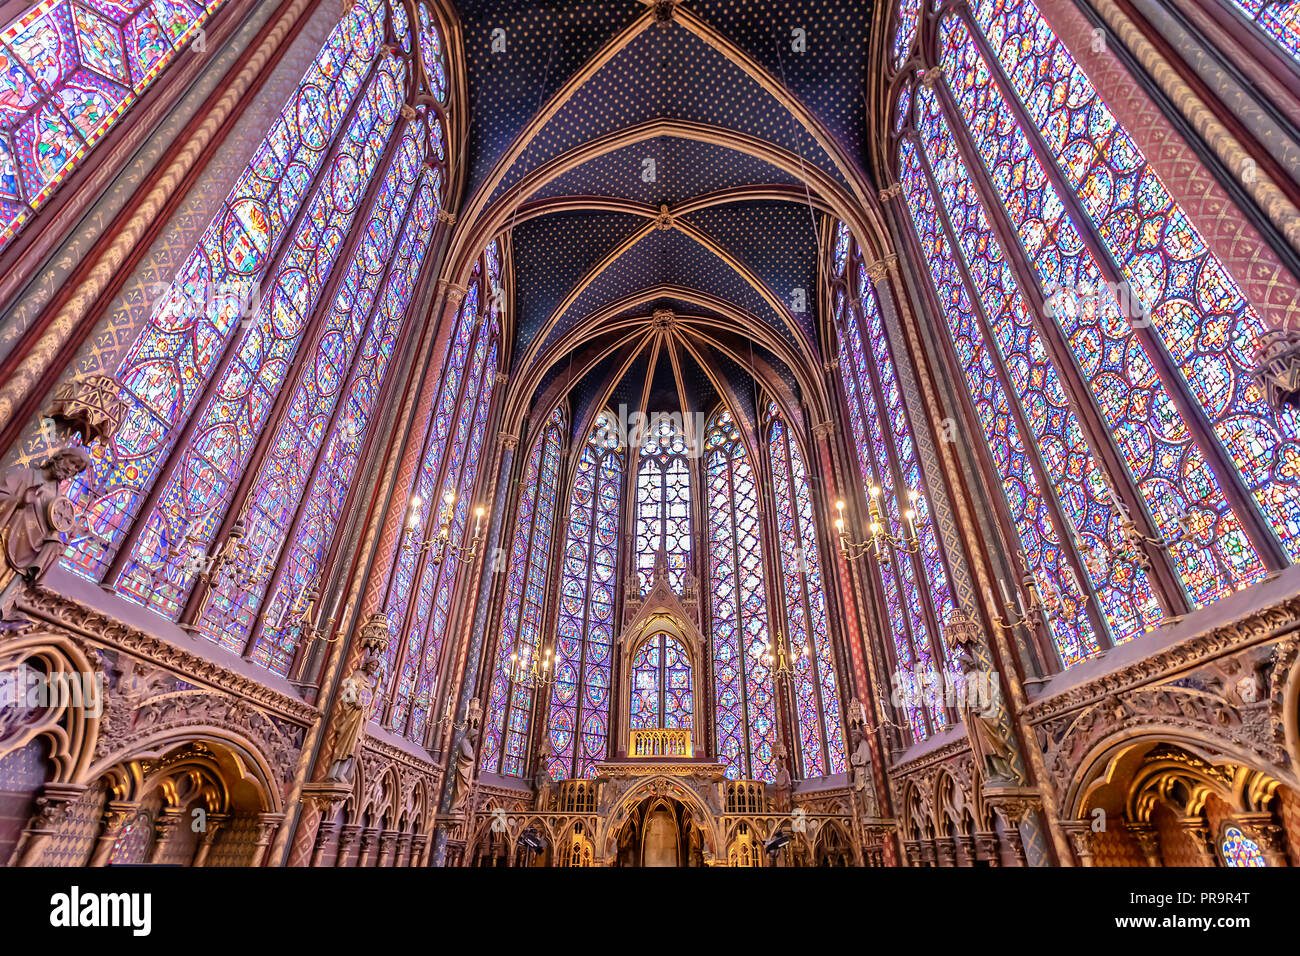 Interior View Of Sainte Chapelle A Gothic Style Royal